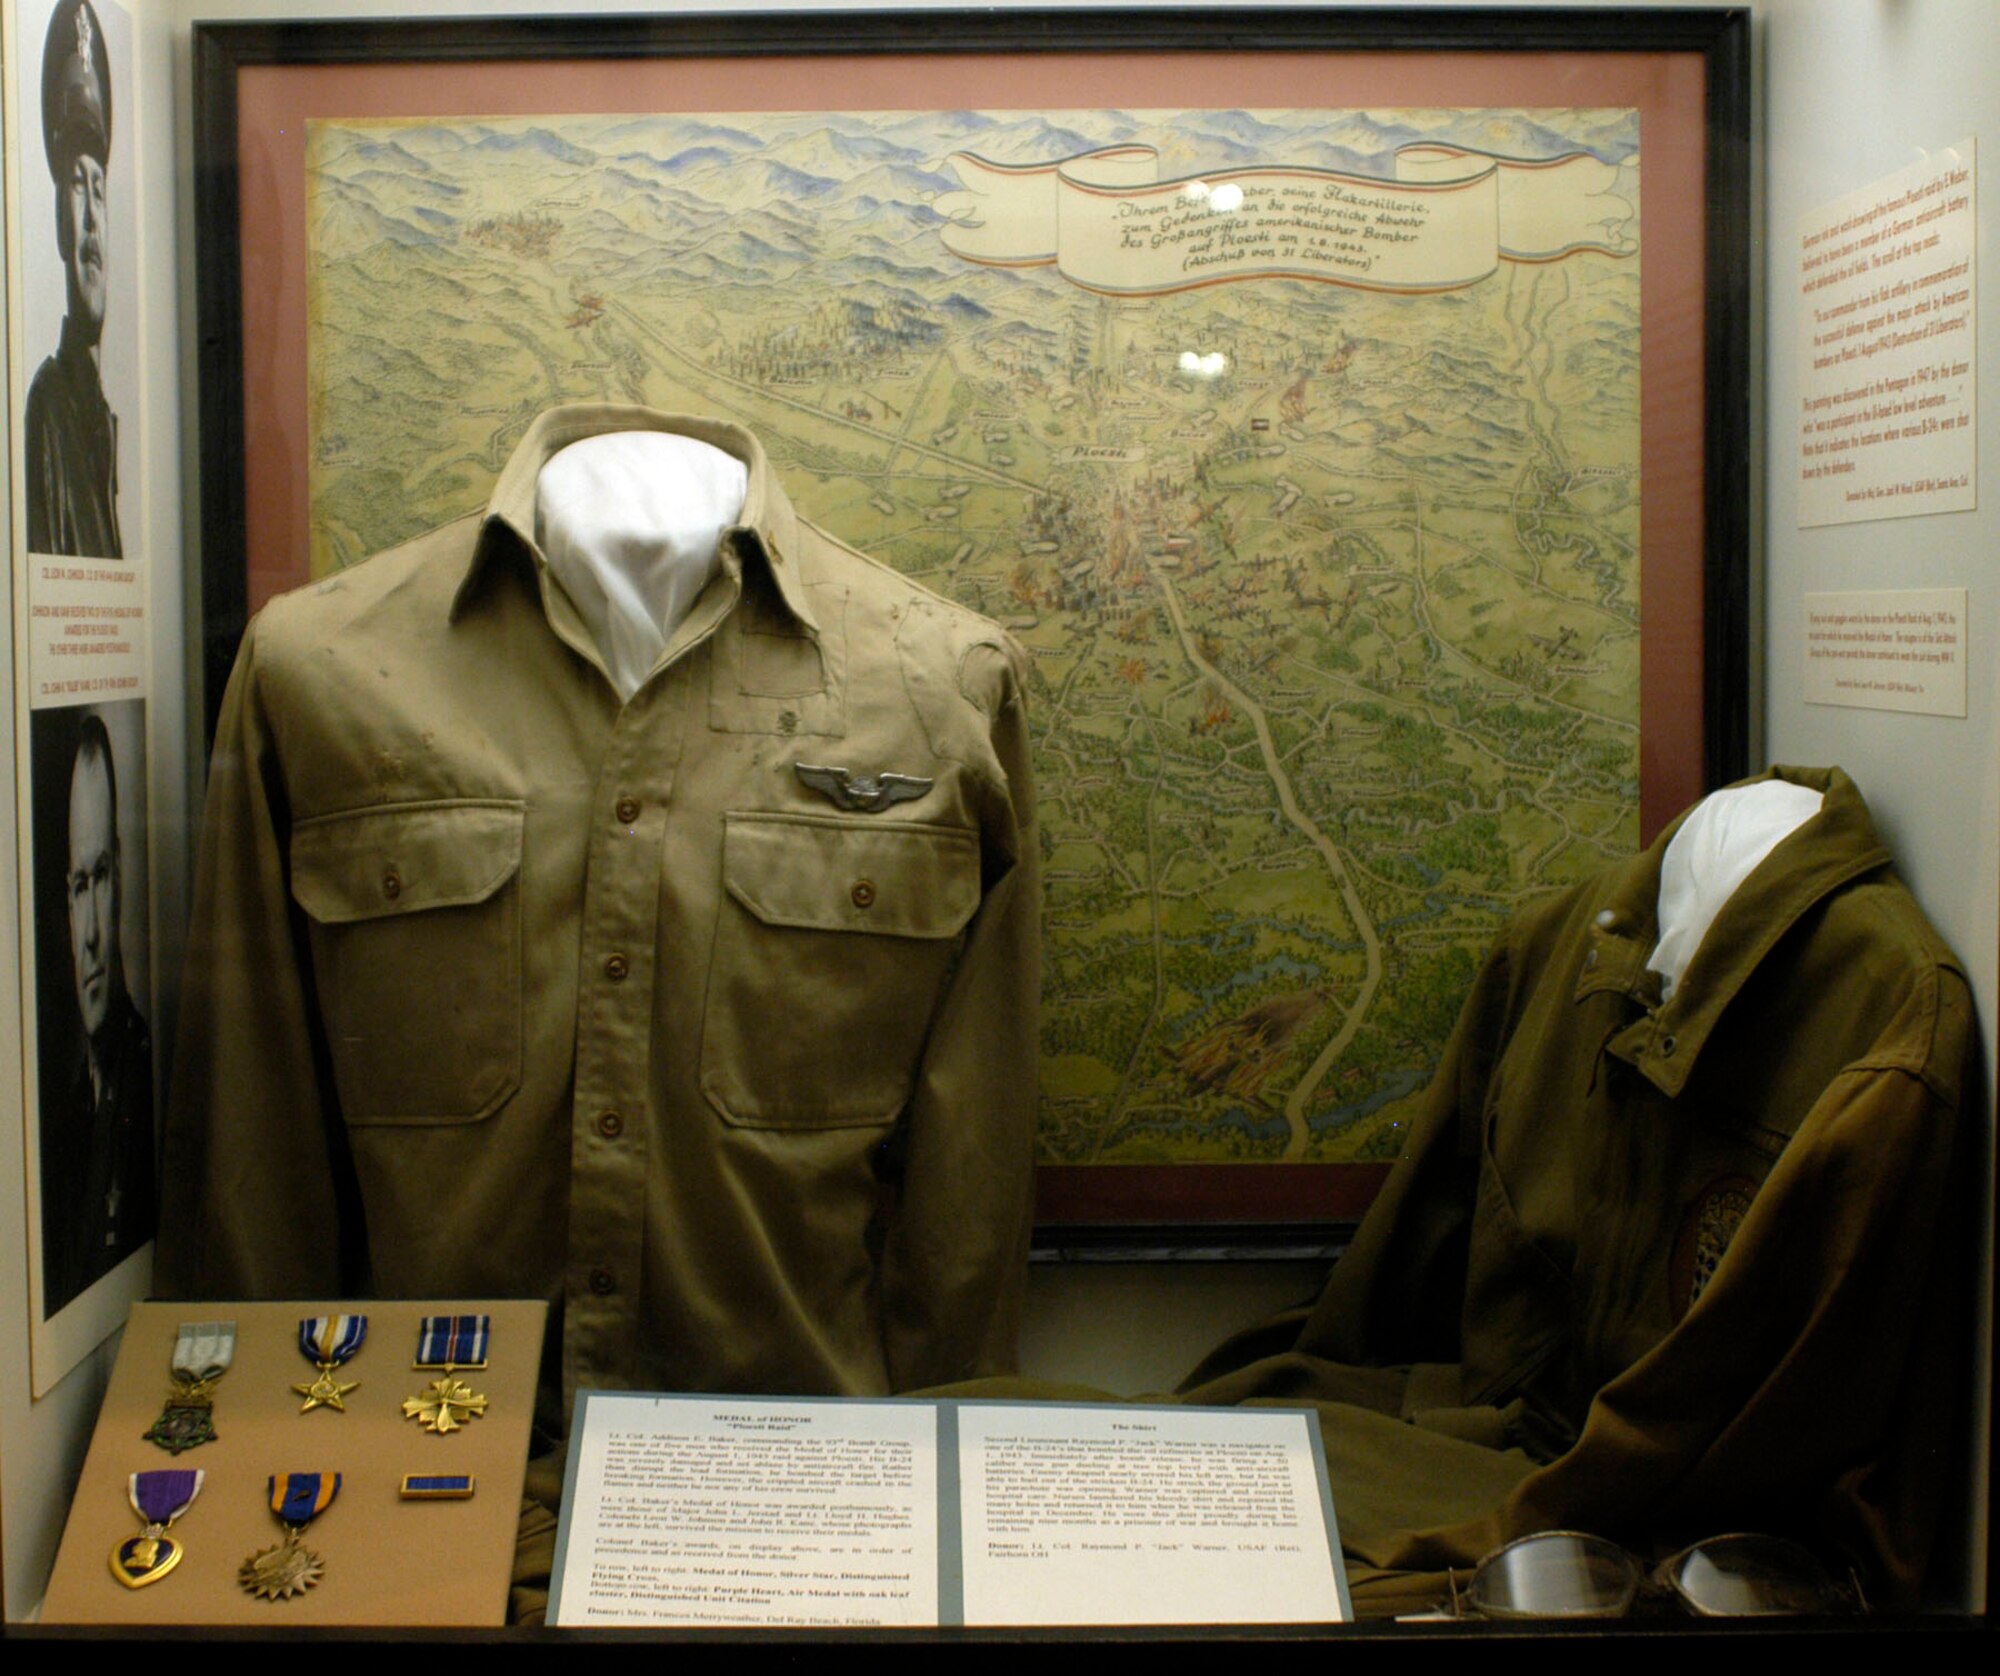 DAYTON, Ohio - Uniforms worn during the Ploesti raid on display in the World War II Gallery at the National Museum of the U.S. Air Force. (U.S. Air Force photo)